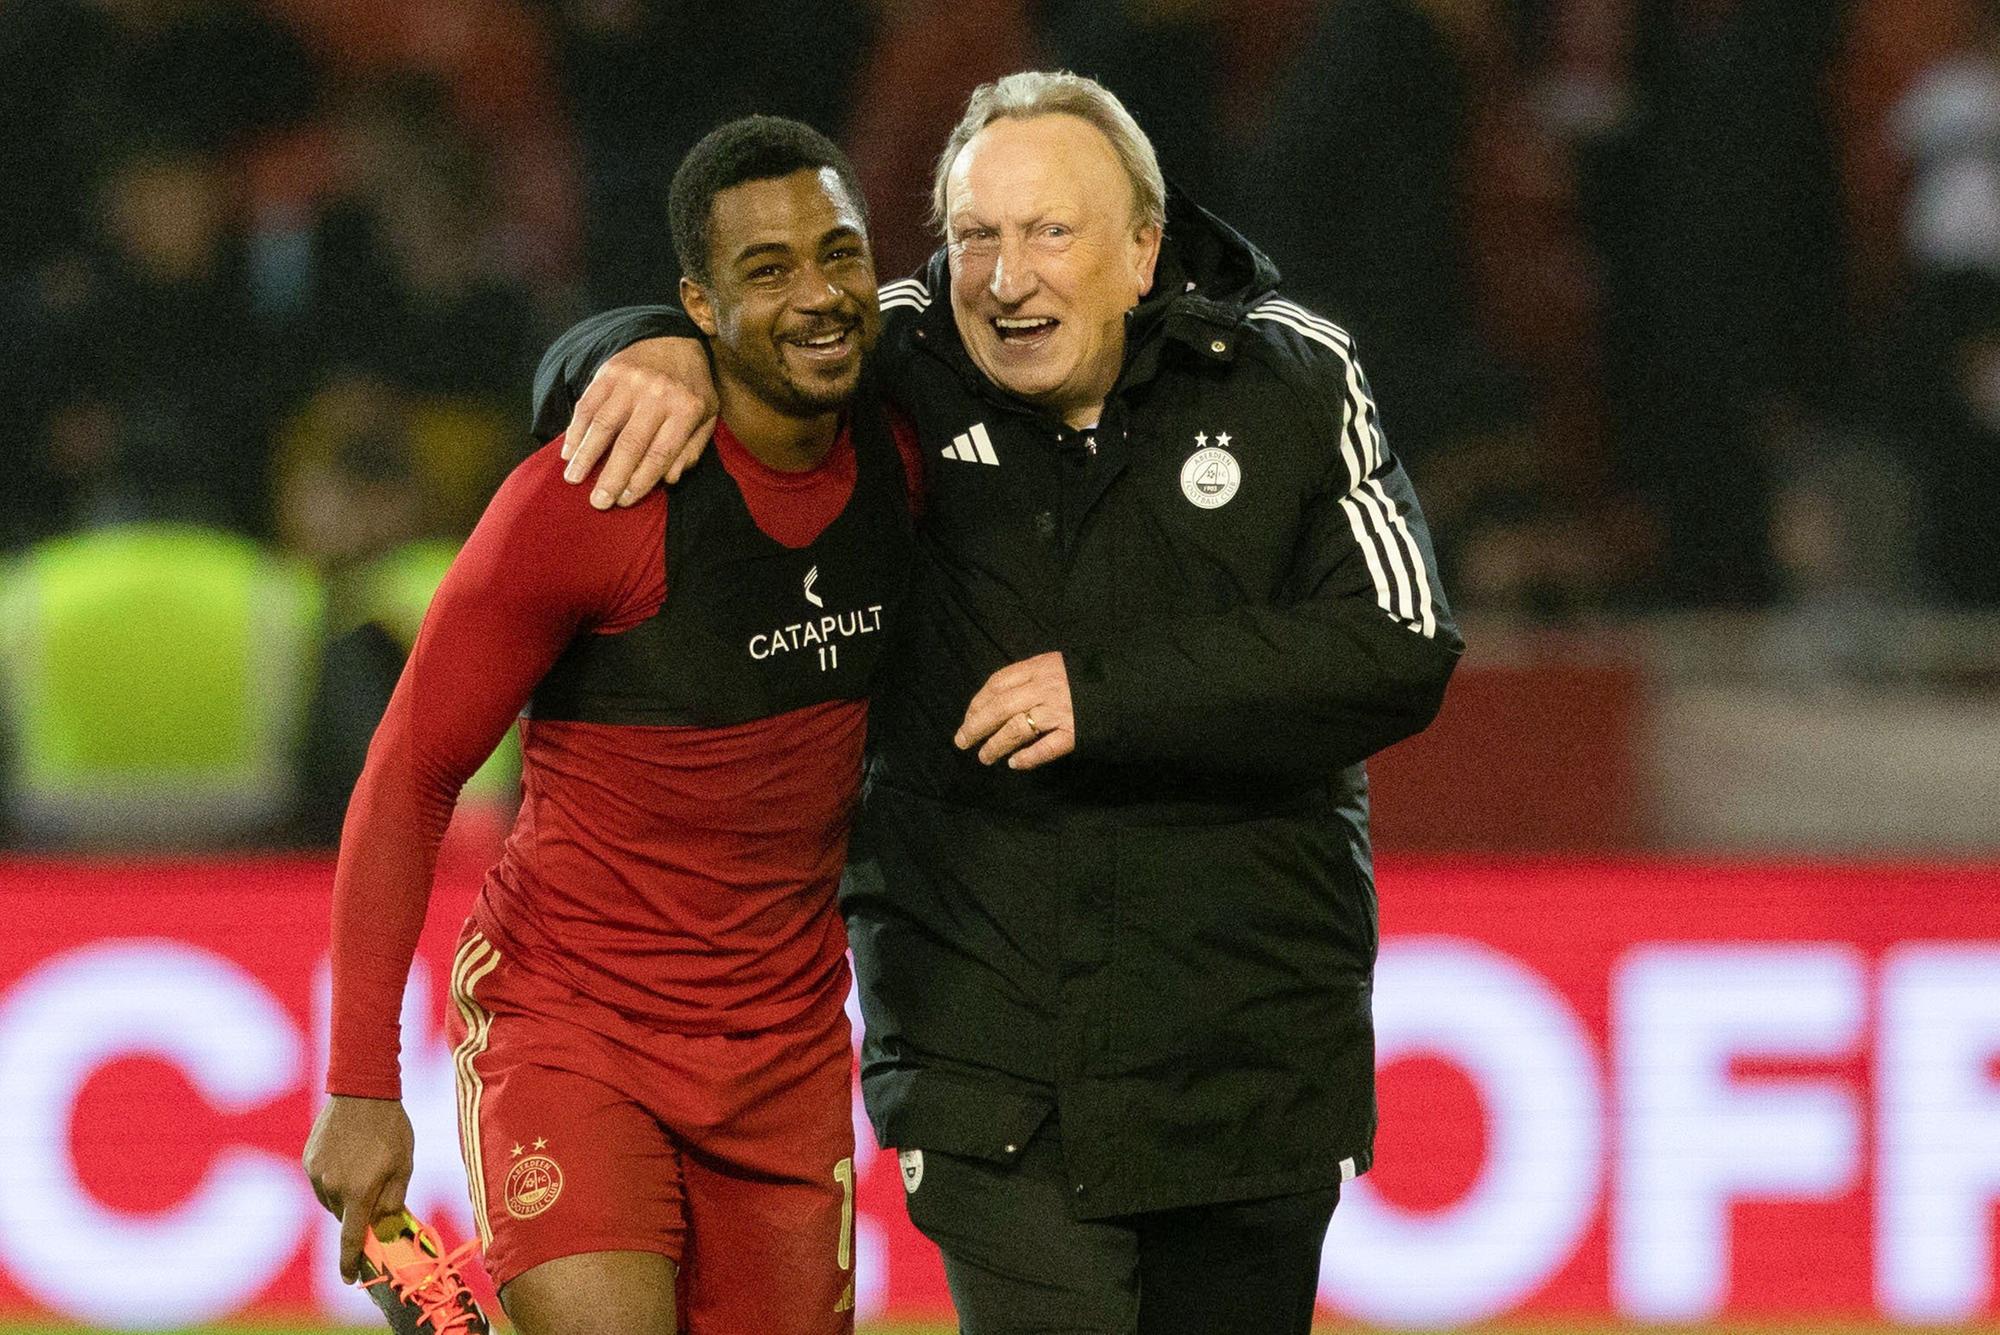 neil warnock feared aberdeen sack at 3-0 down as he compares var to post office scandal horizon system